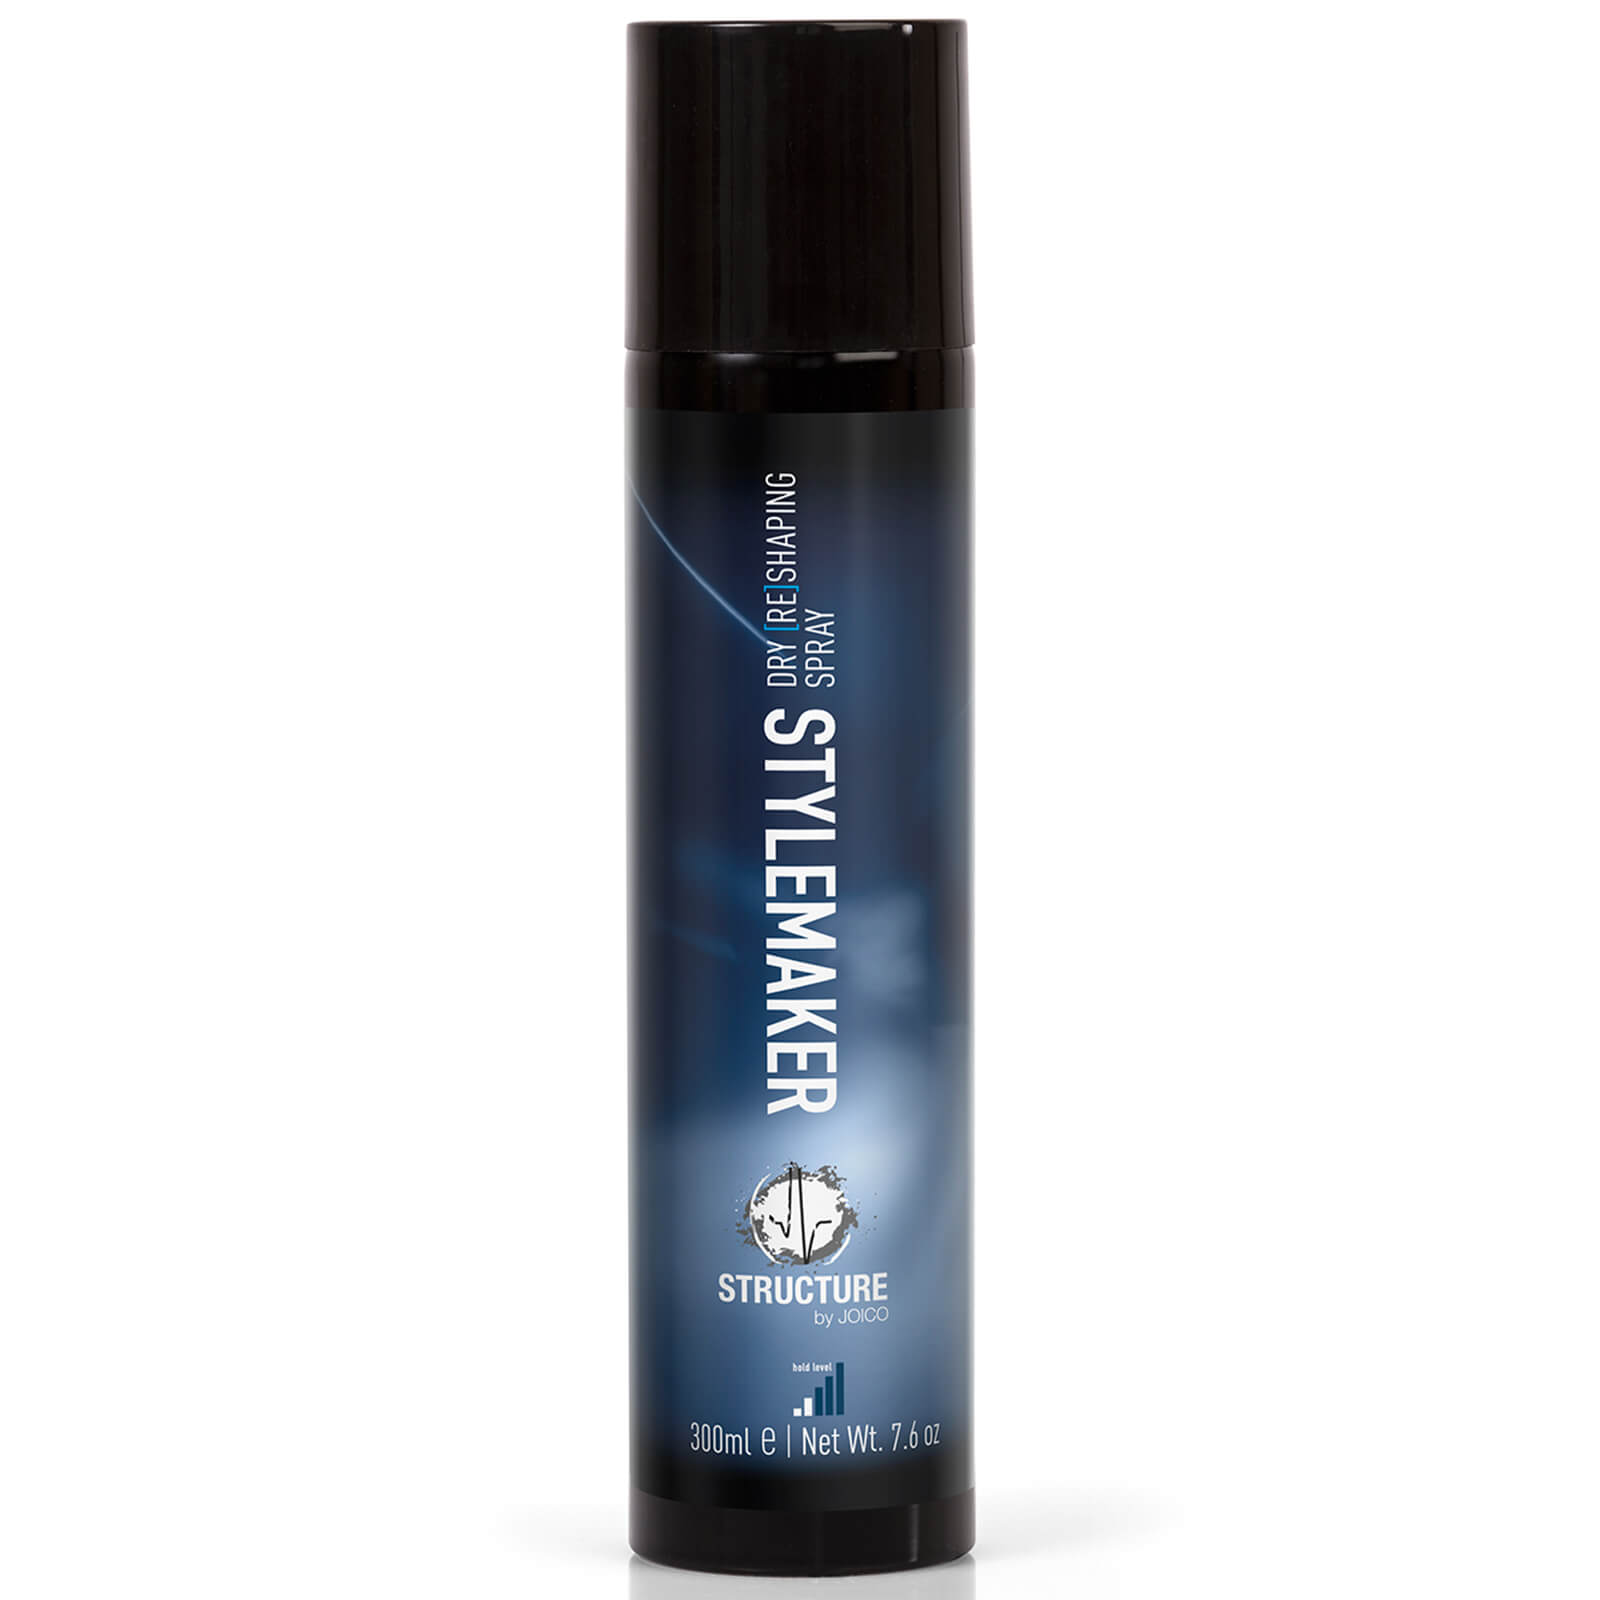 Joico Structure Stylemaker Dry Re-Shaping Spray 300ml